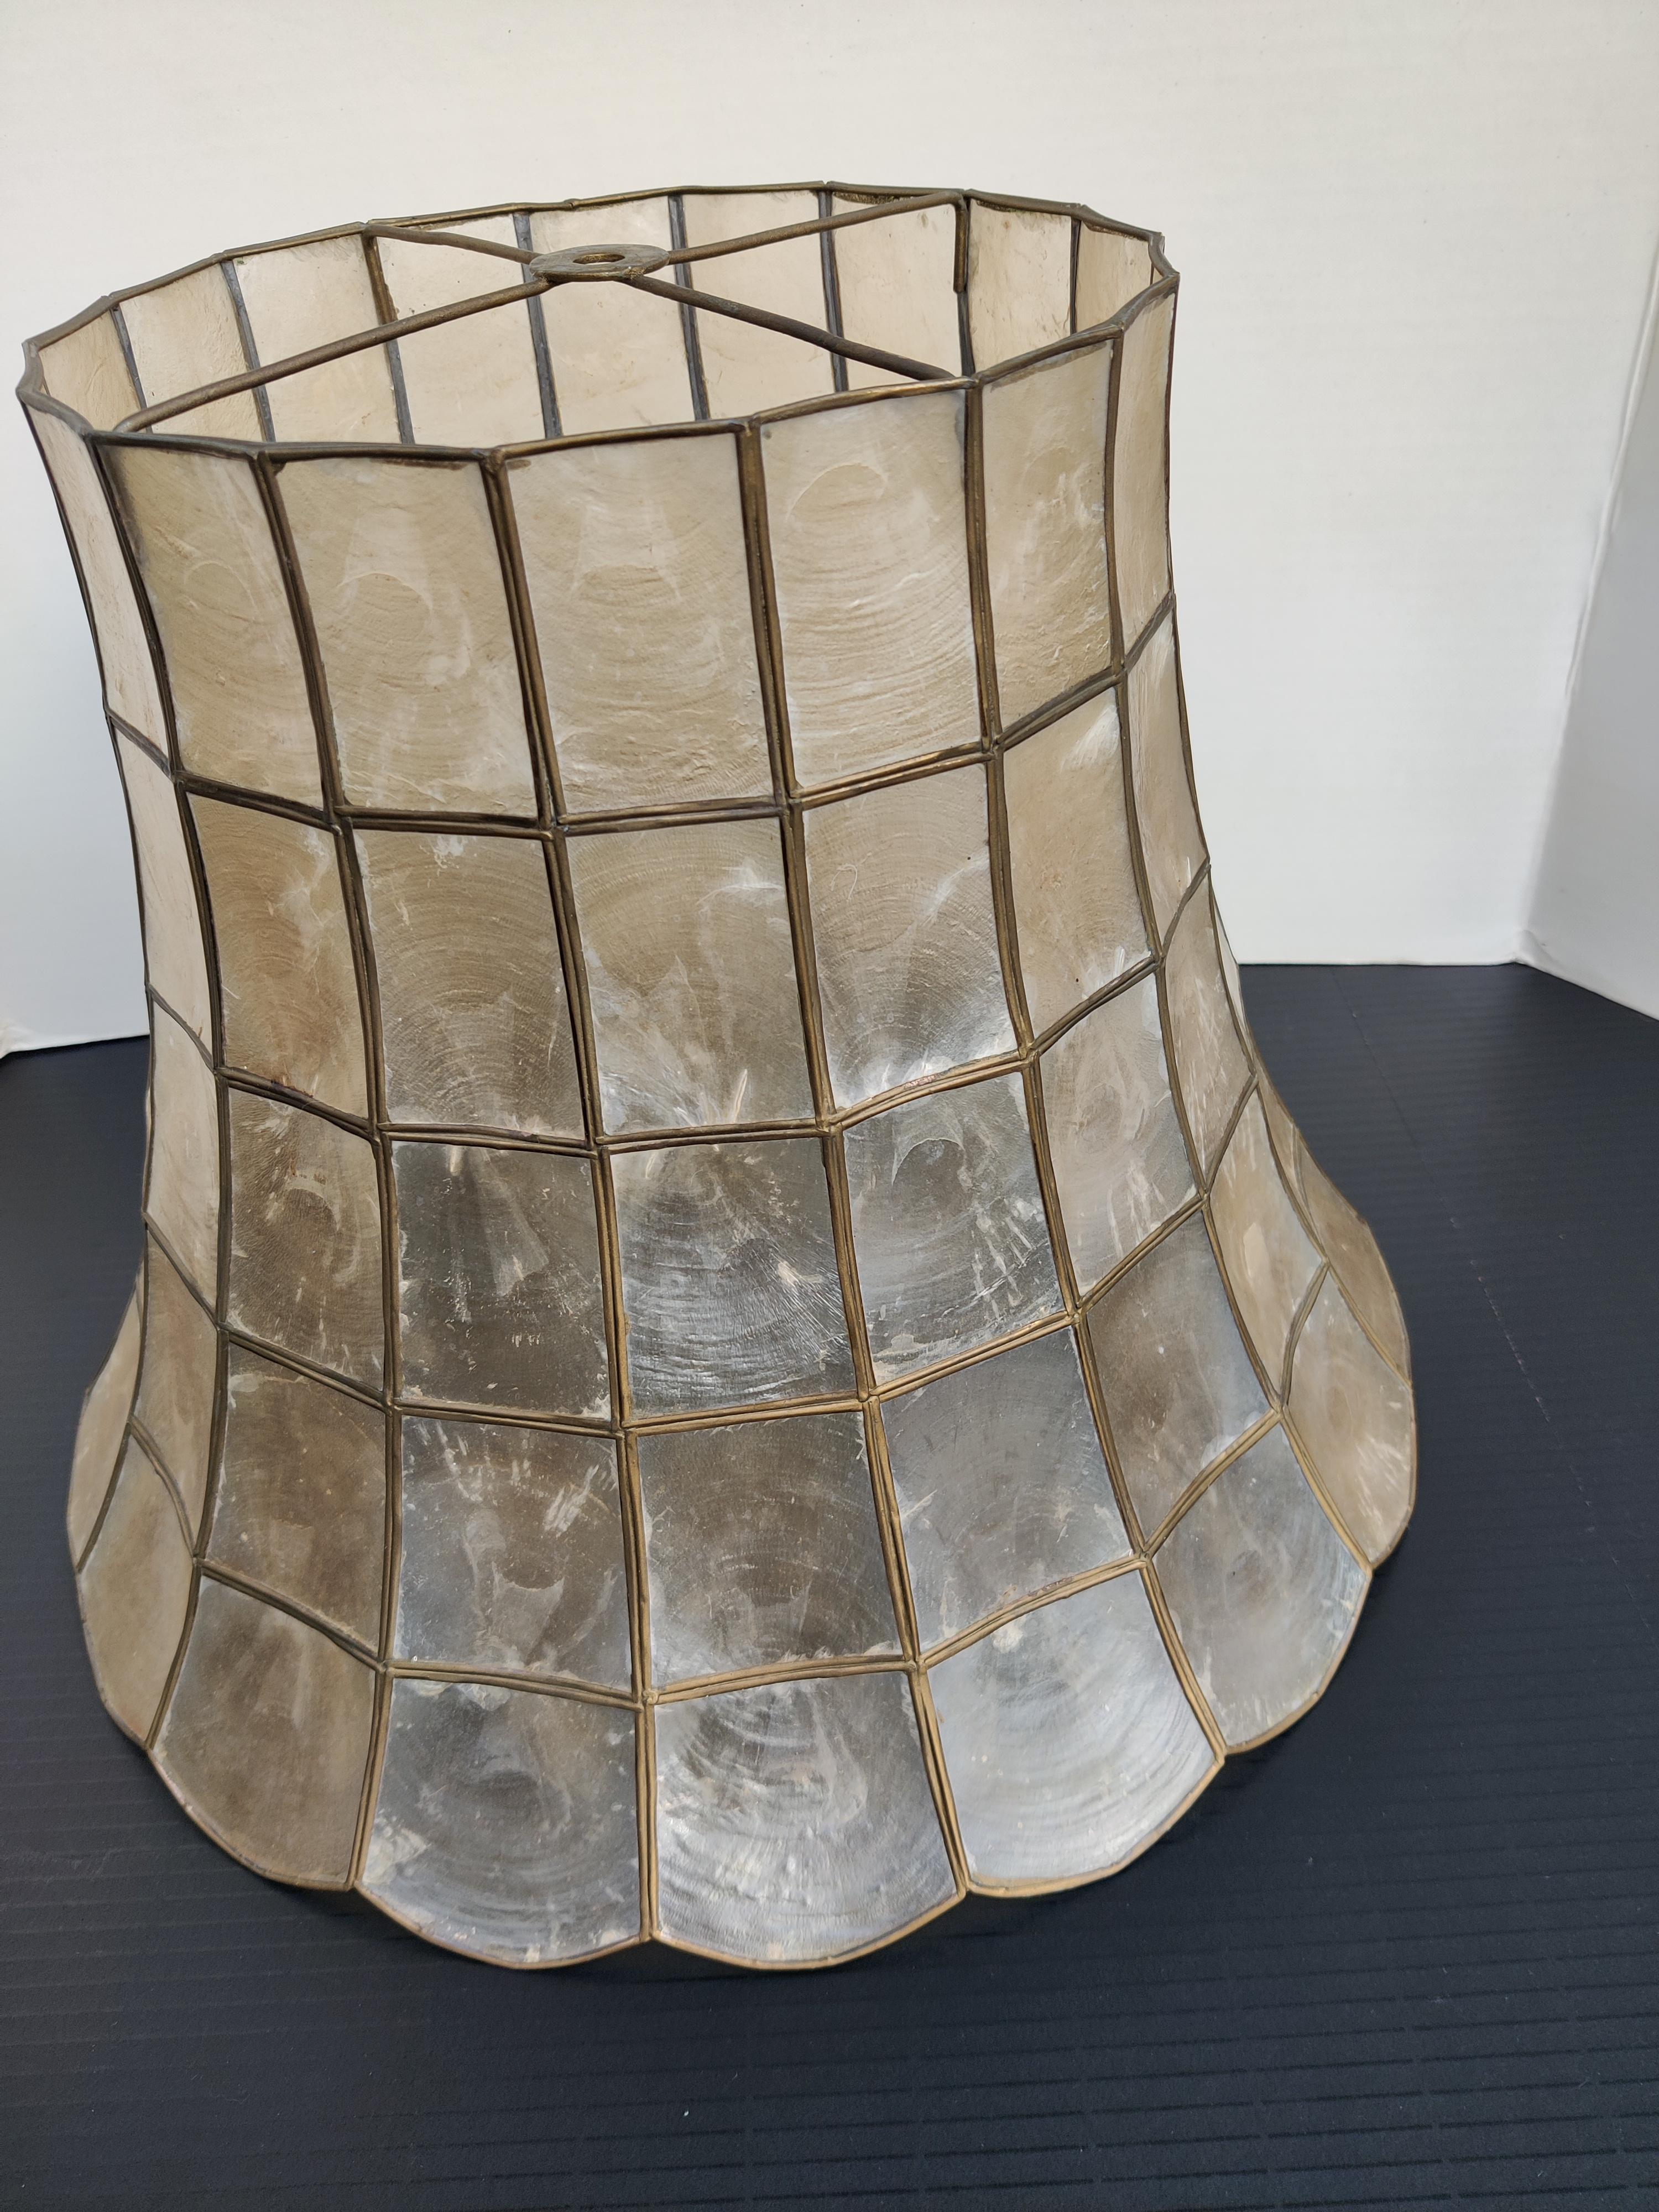 Capiz Shell Mid Century Italian Lamp Shade
From top to bottom there are 5, and not 4, rectangular panels.   
Very good condition. 
Top 9